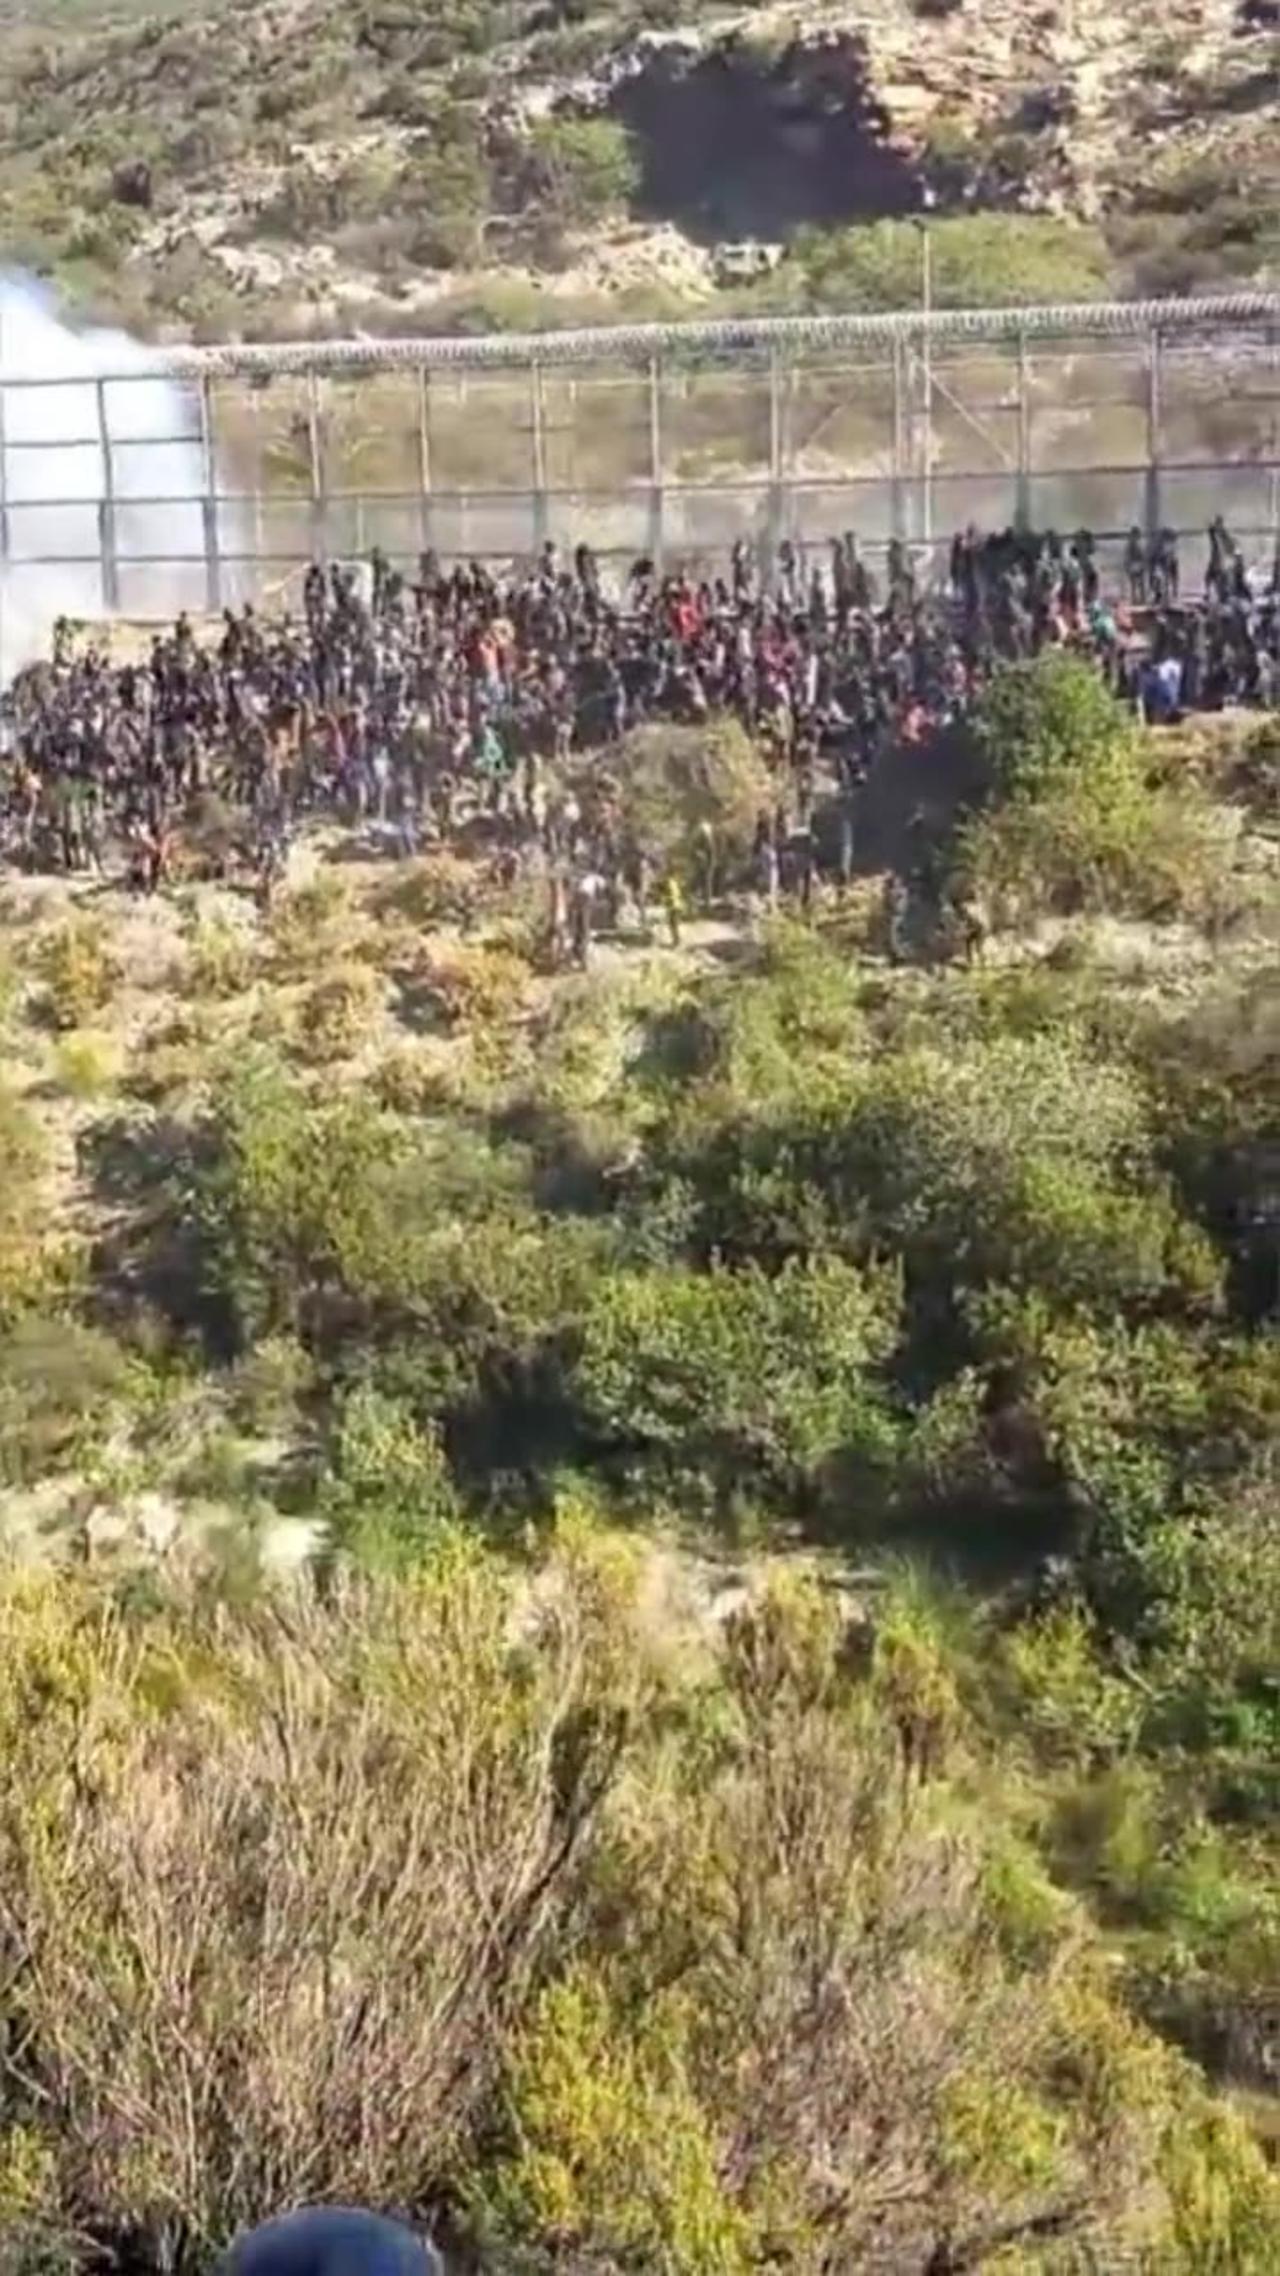 Migrants Rush Border Wall In Attempt To Gain Asylum/Work… In Spain